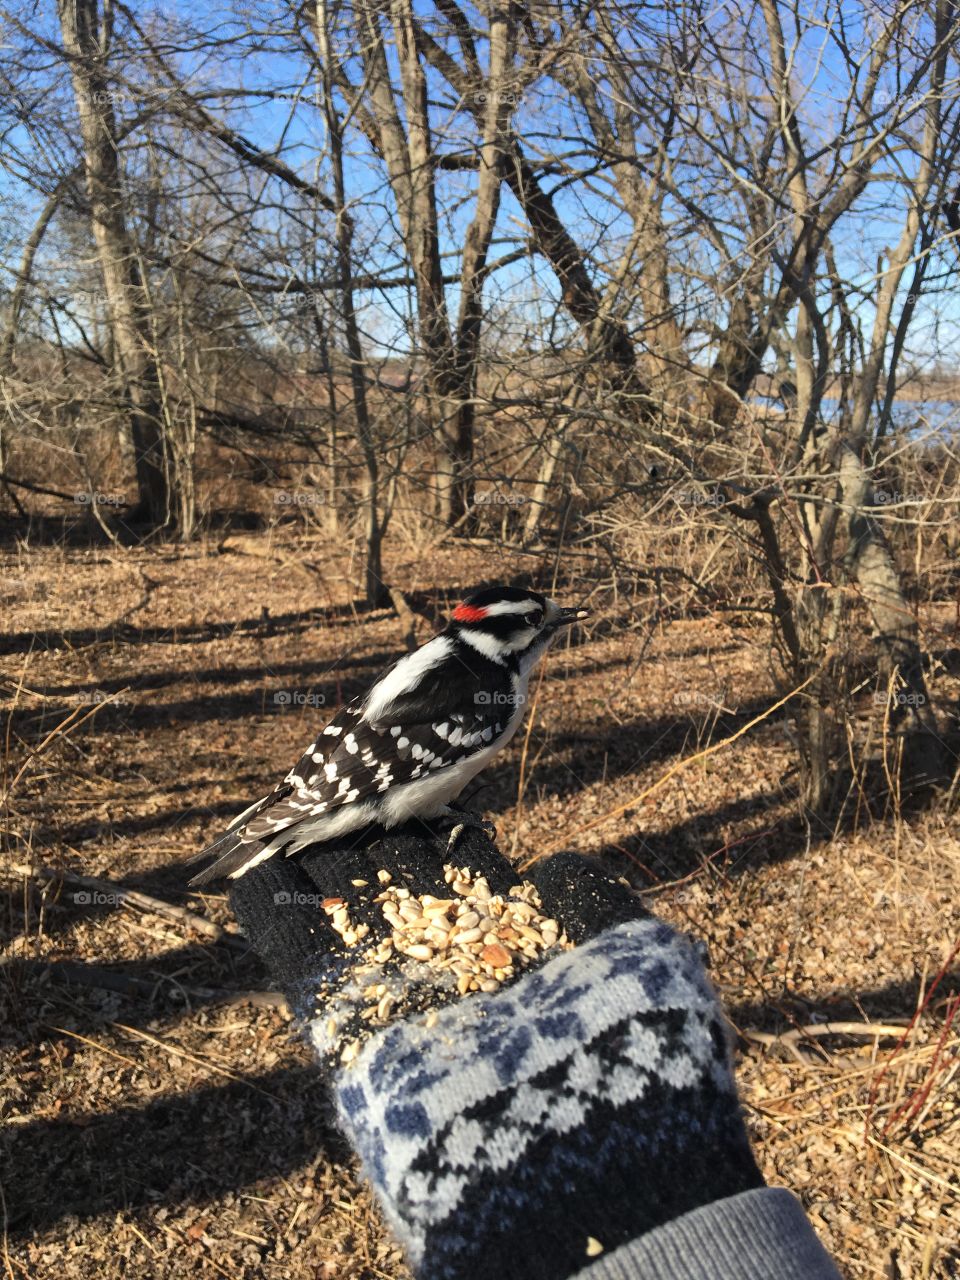 Downy woodpecker at a nature conservation area in Ontario. Taken in winter. Trees are barren and you can see the lake. The sky is blue.